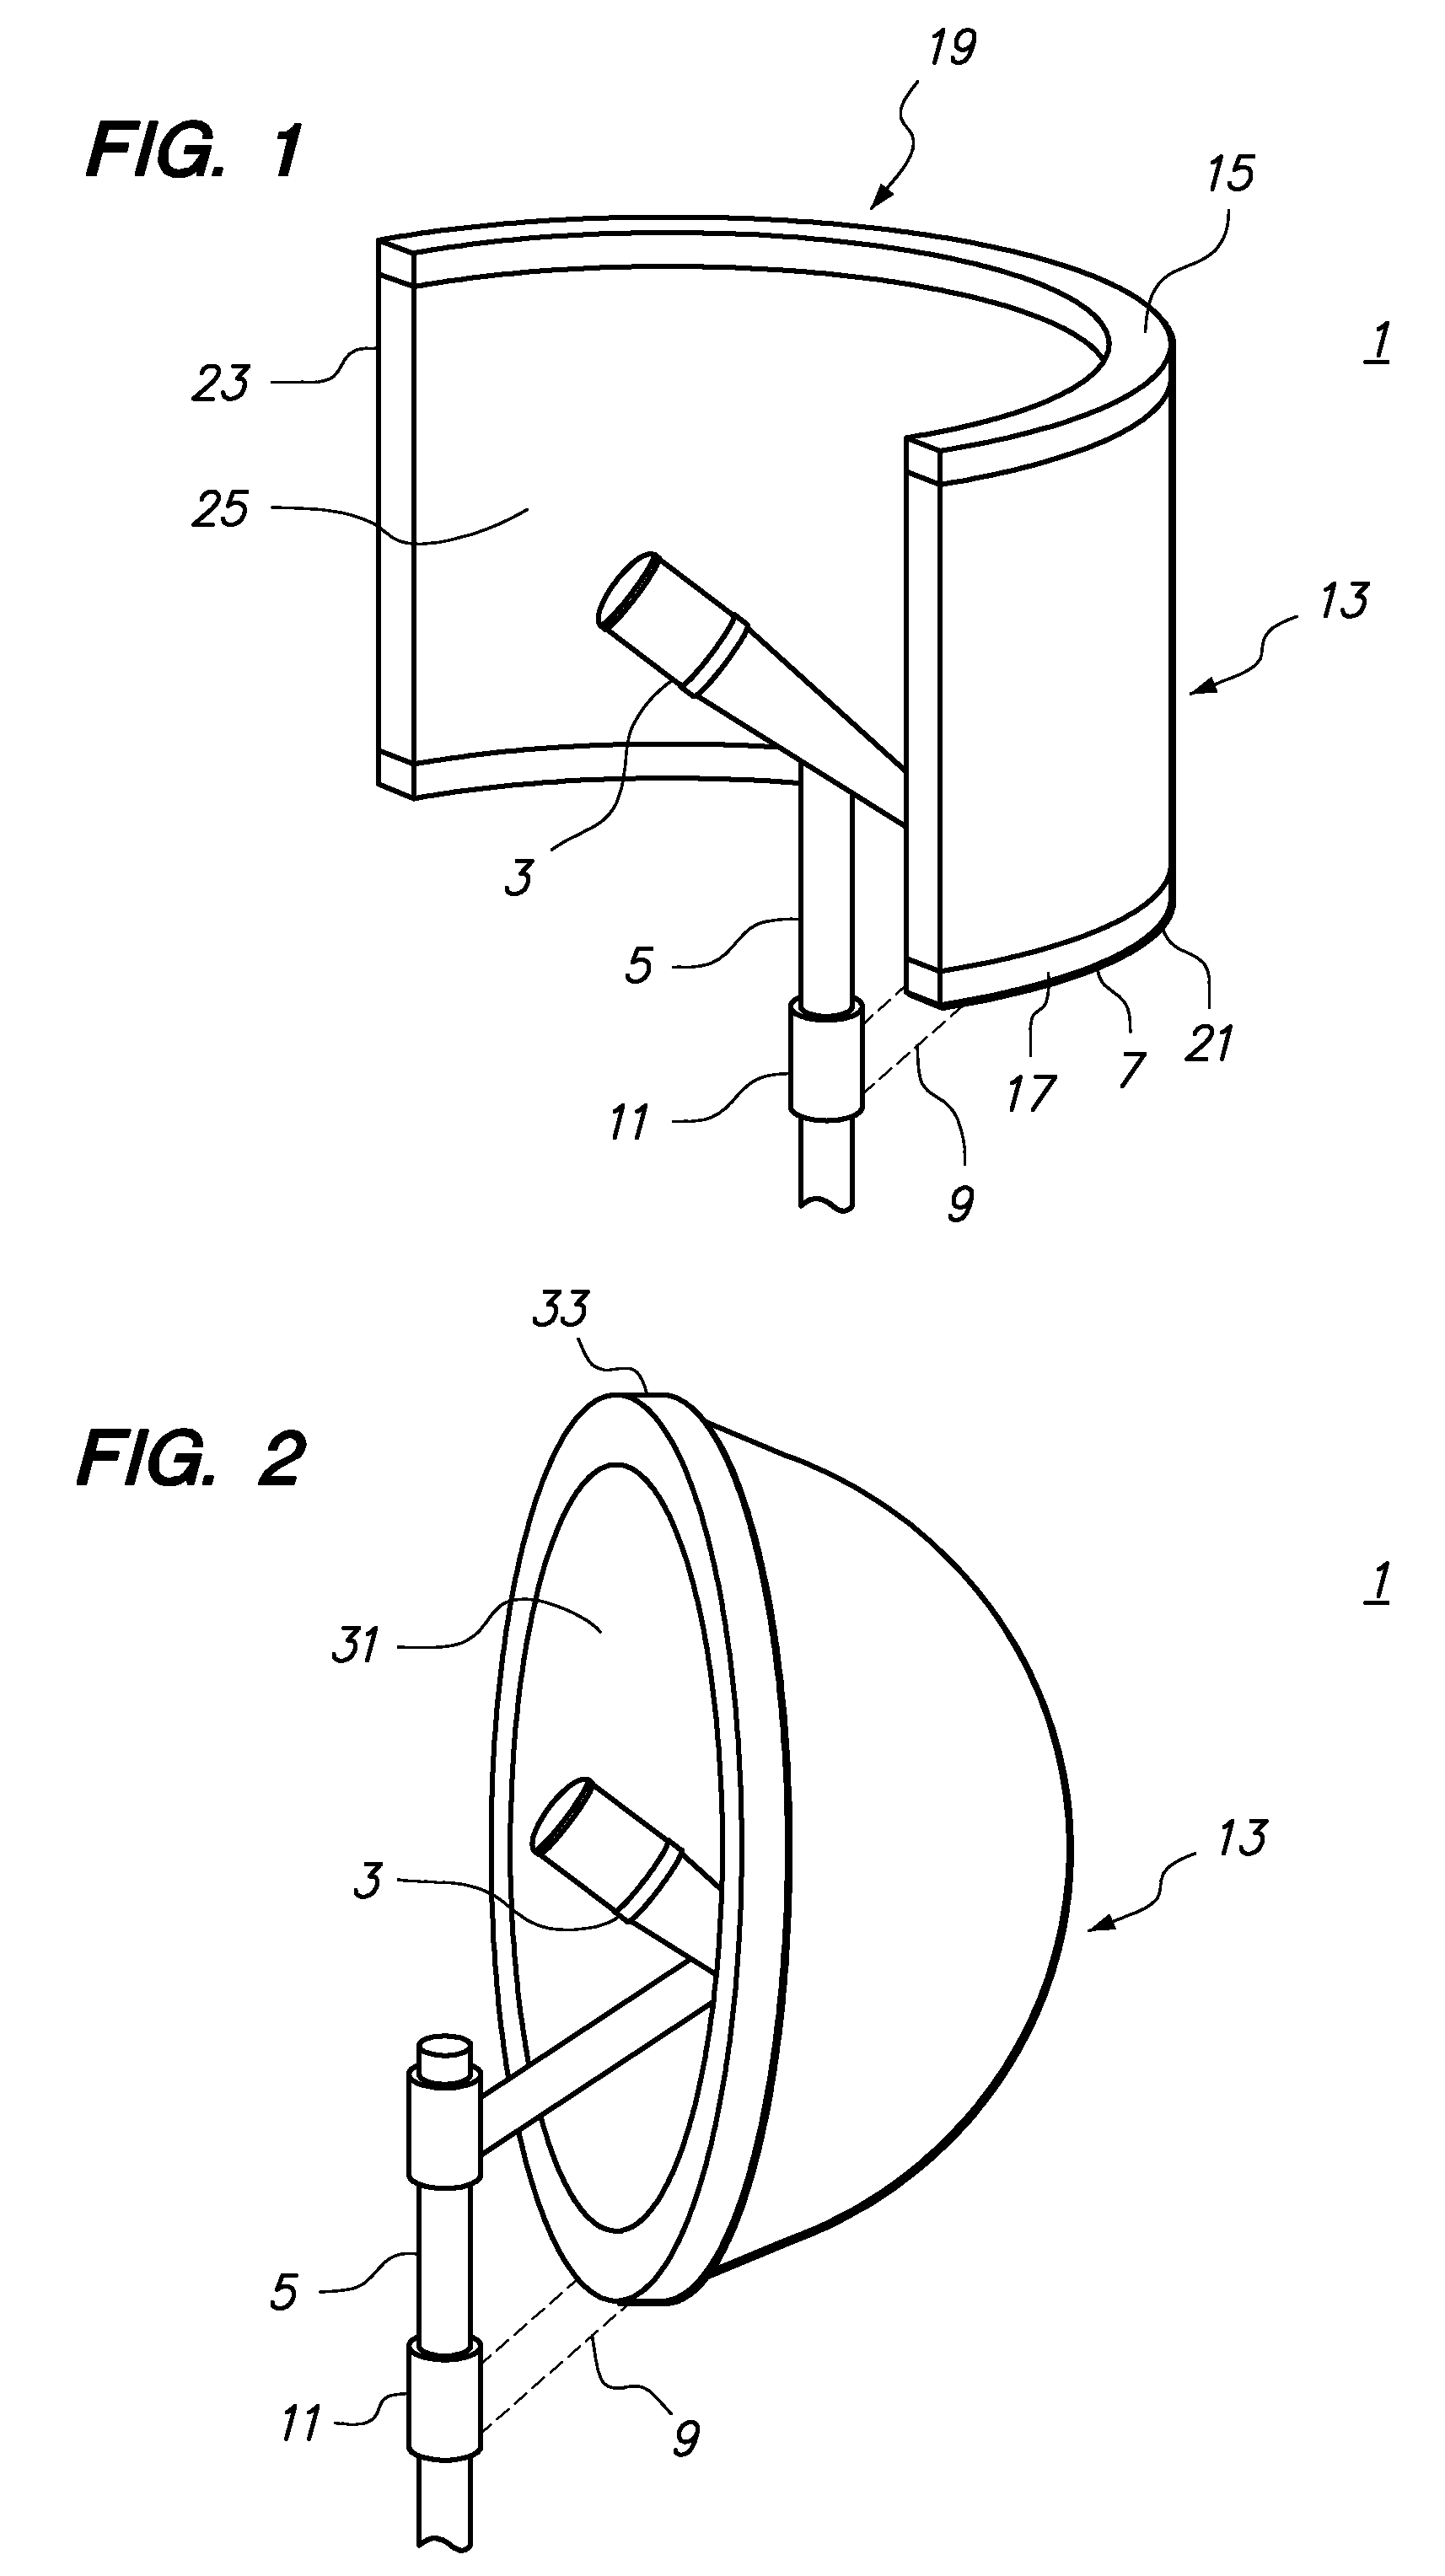 Apparatus for Absorbing Acoustical Energy and Use Thereof